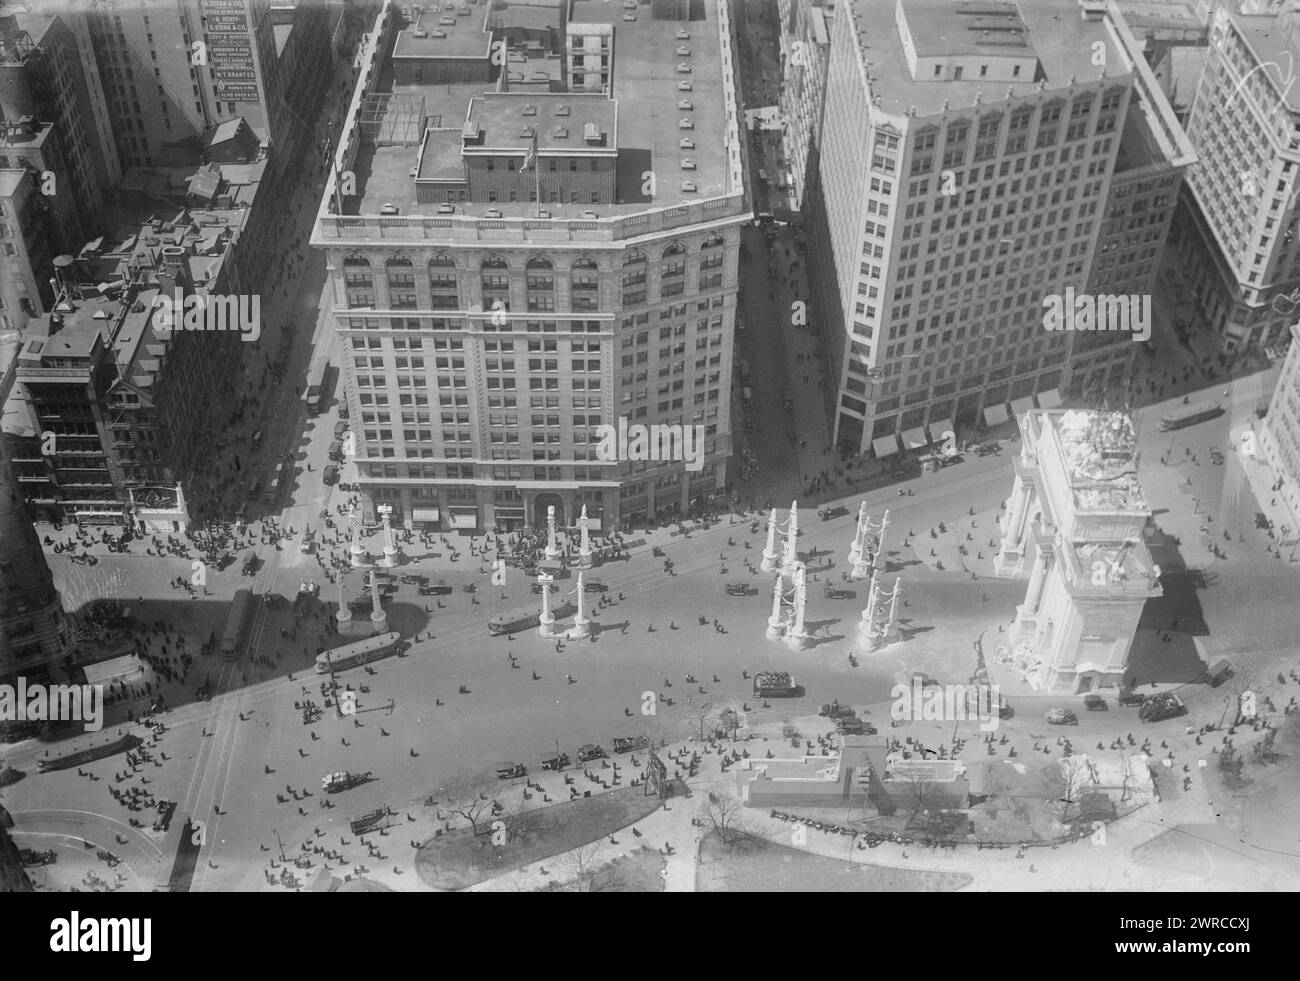 From Met. Bldg., Photograph shows an aerial view from the Metropolitan Life Insurance Company Tower at 24th Street and 5th Avenue, New York City, showing the temporary 'Victory Arch' at Madison Square., 1918 or 1919, Glass negatives, 1 negative: glass Stock Photo